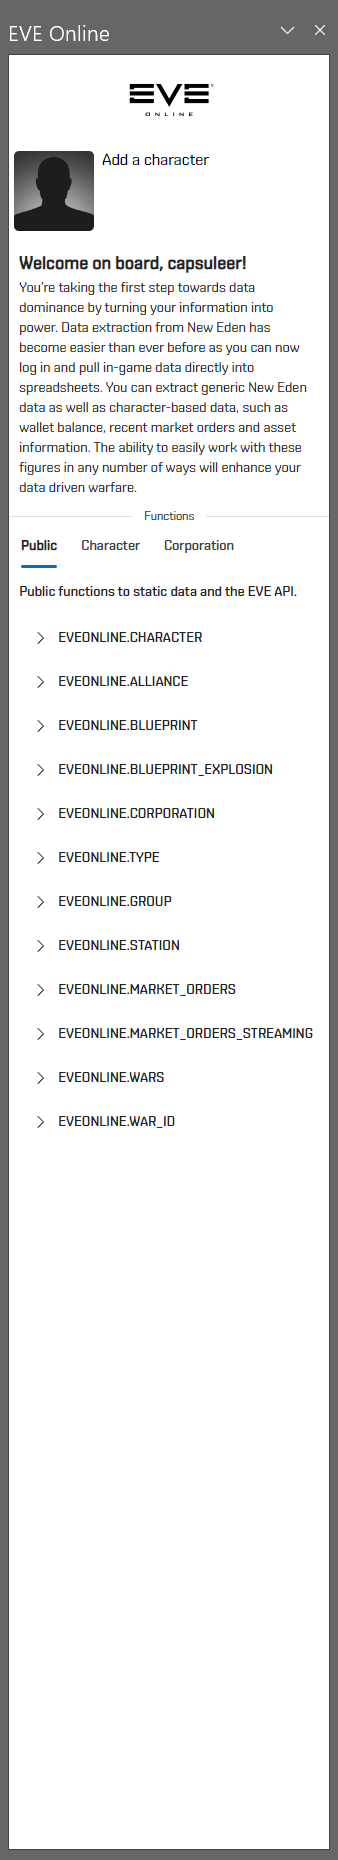 EVE_Online_add-in_pane.png